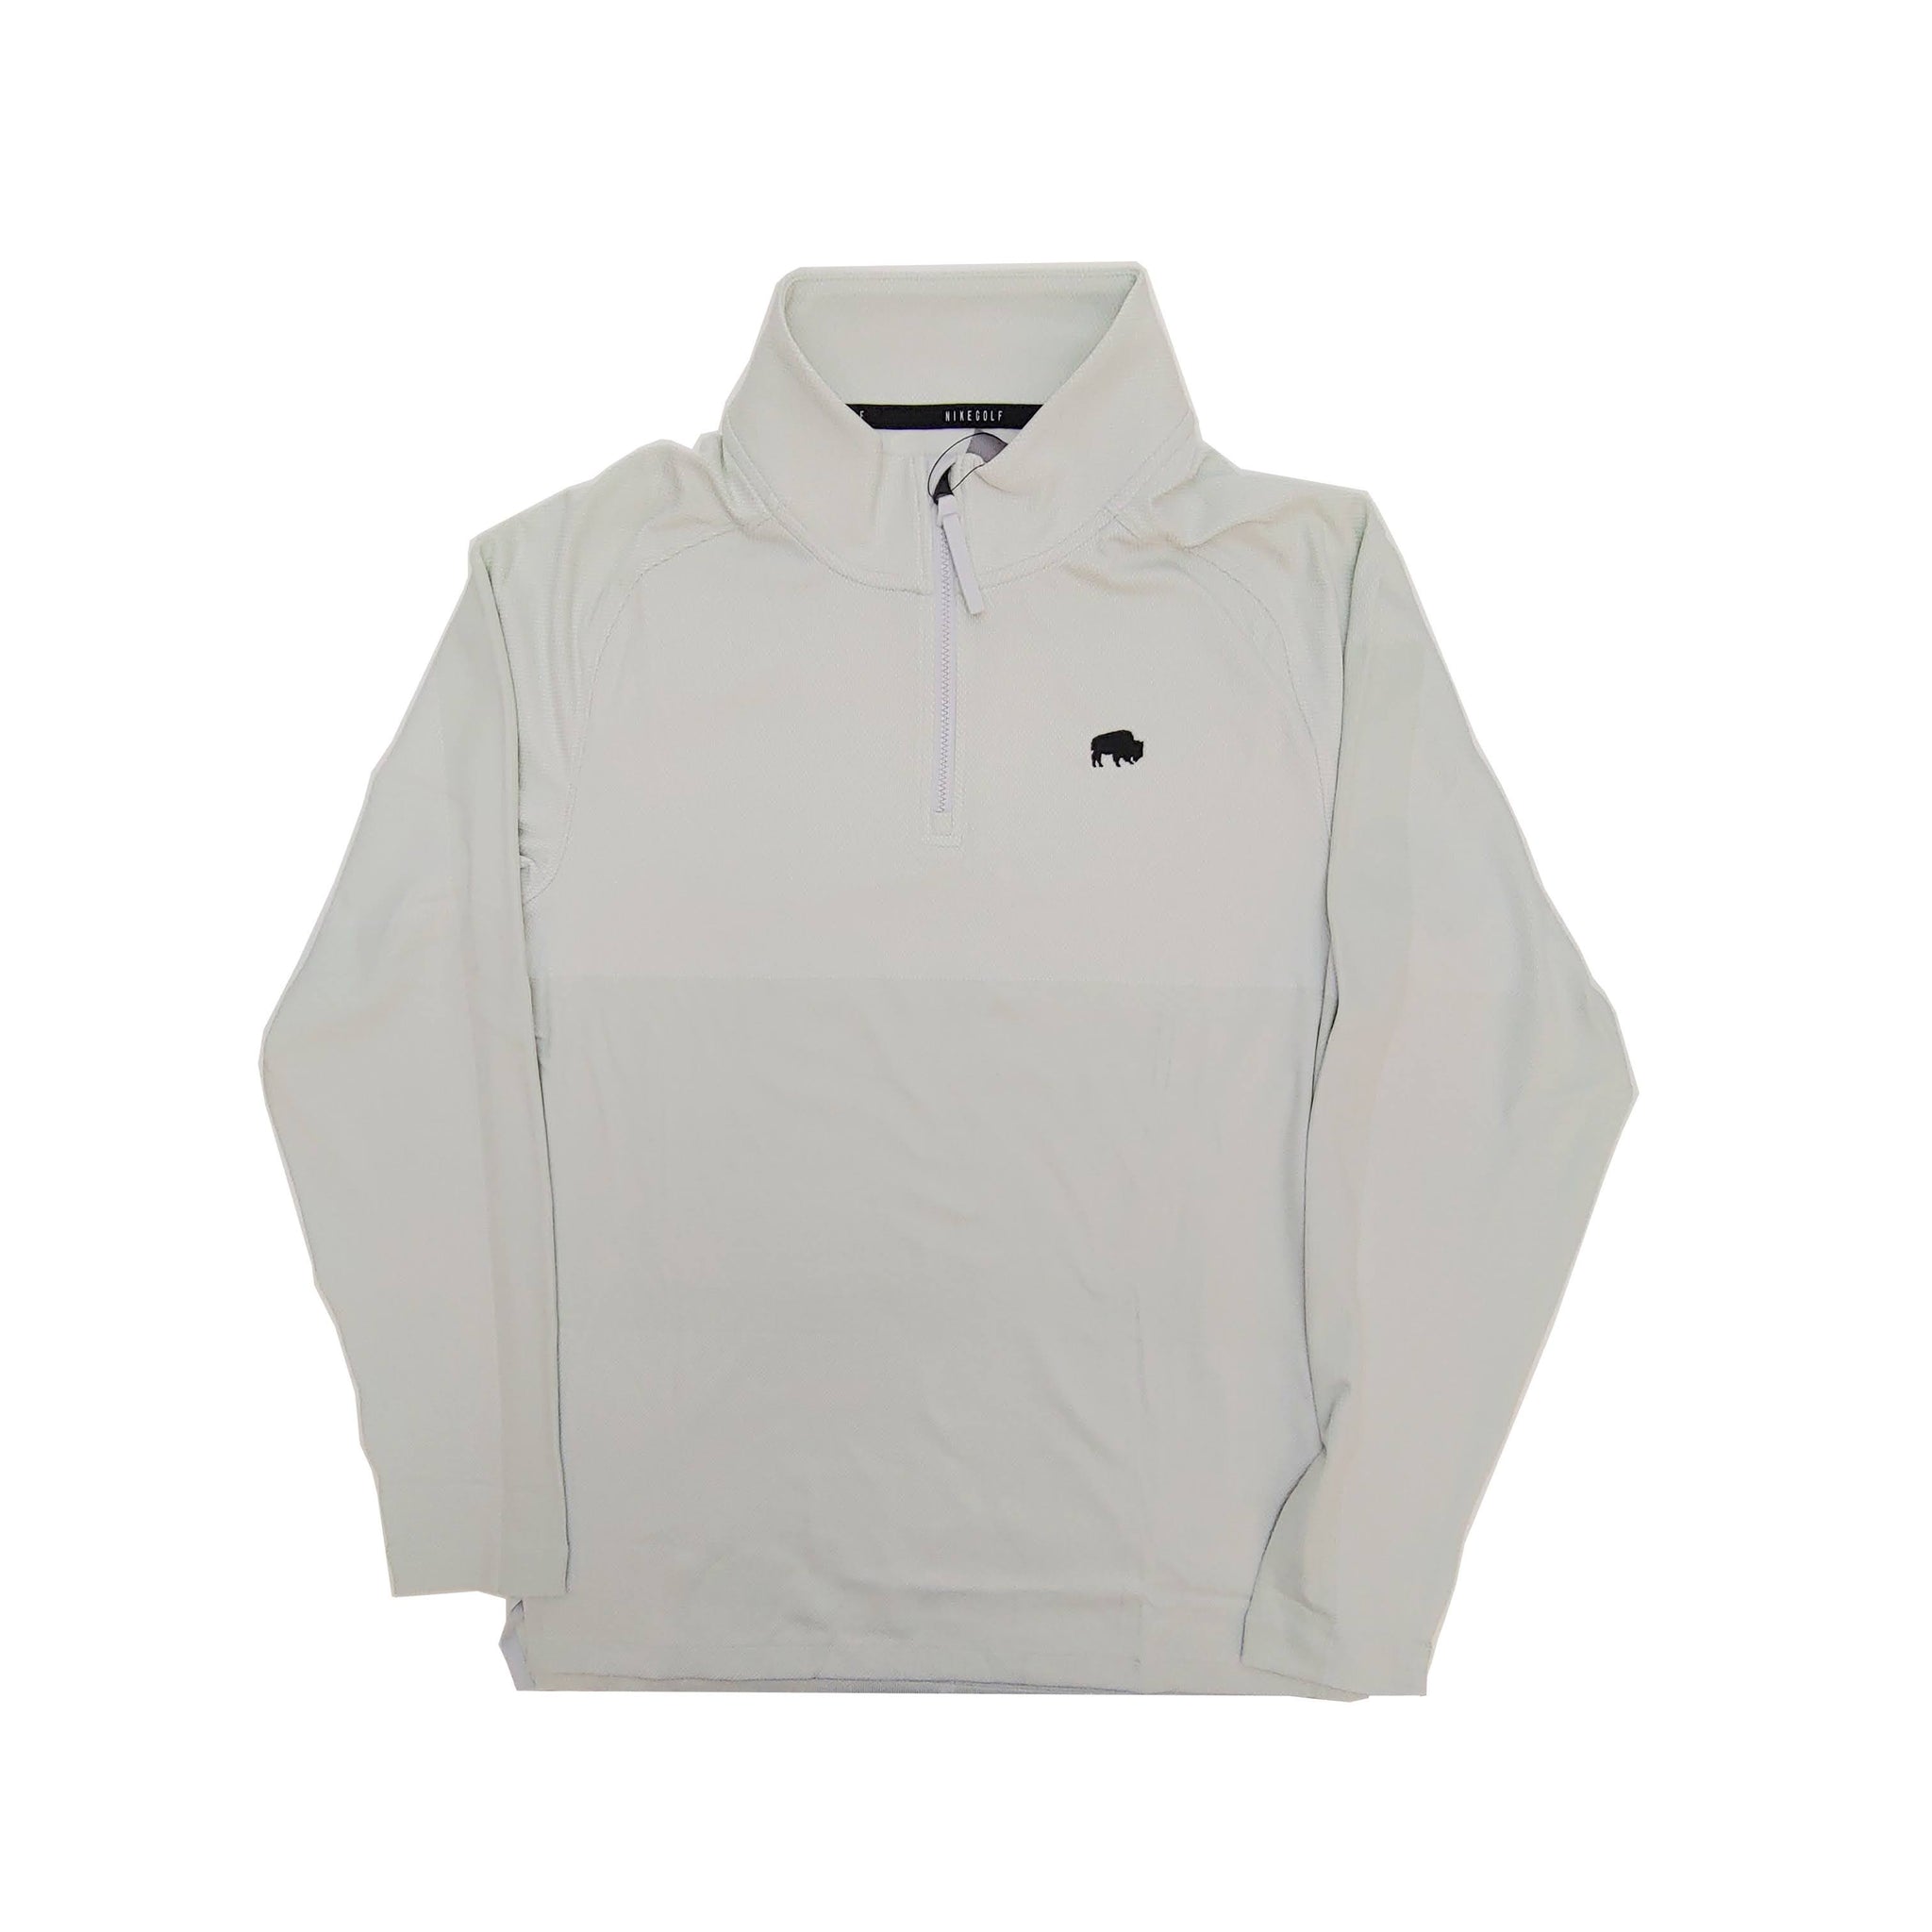 BFLO Ivory Dry-Fit Nike Victory Quarter Zip